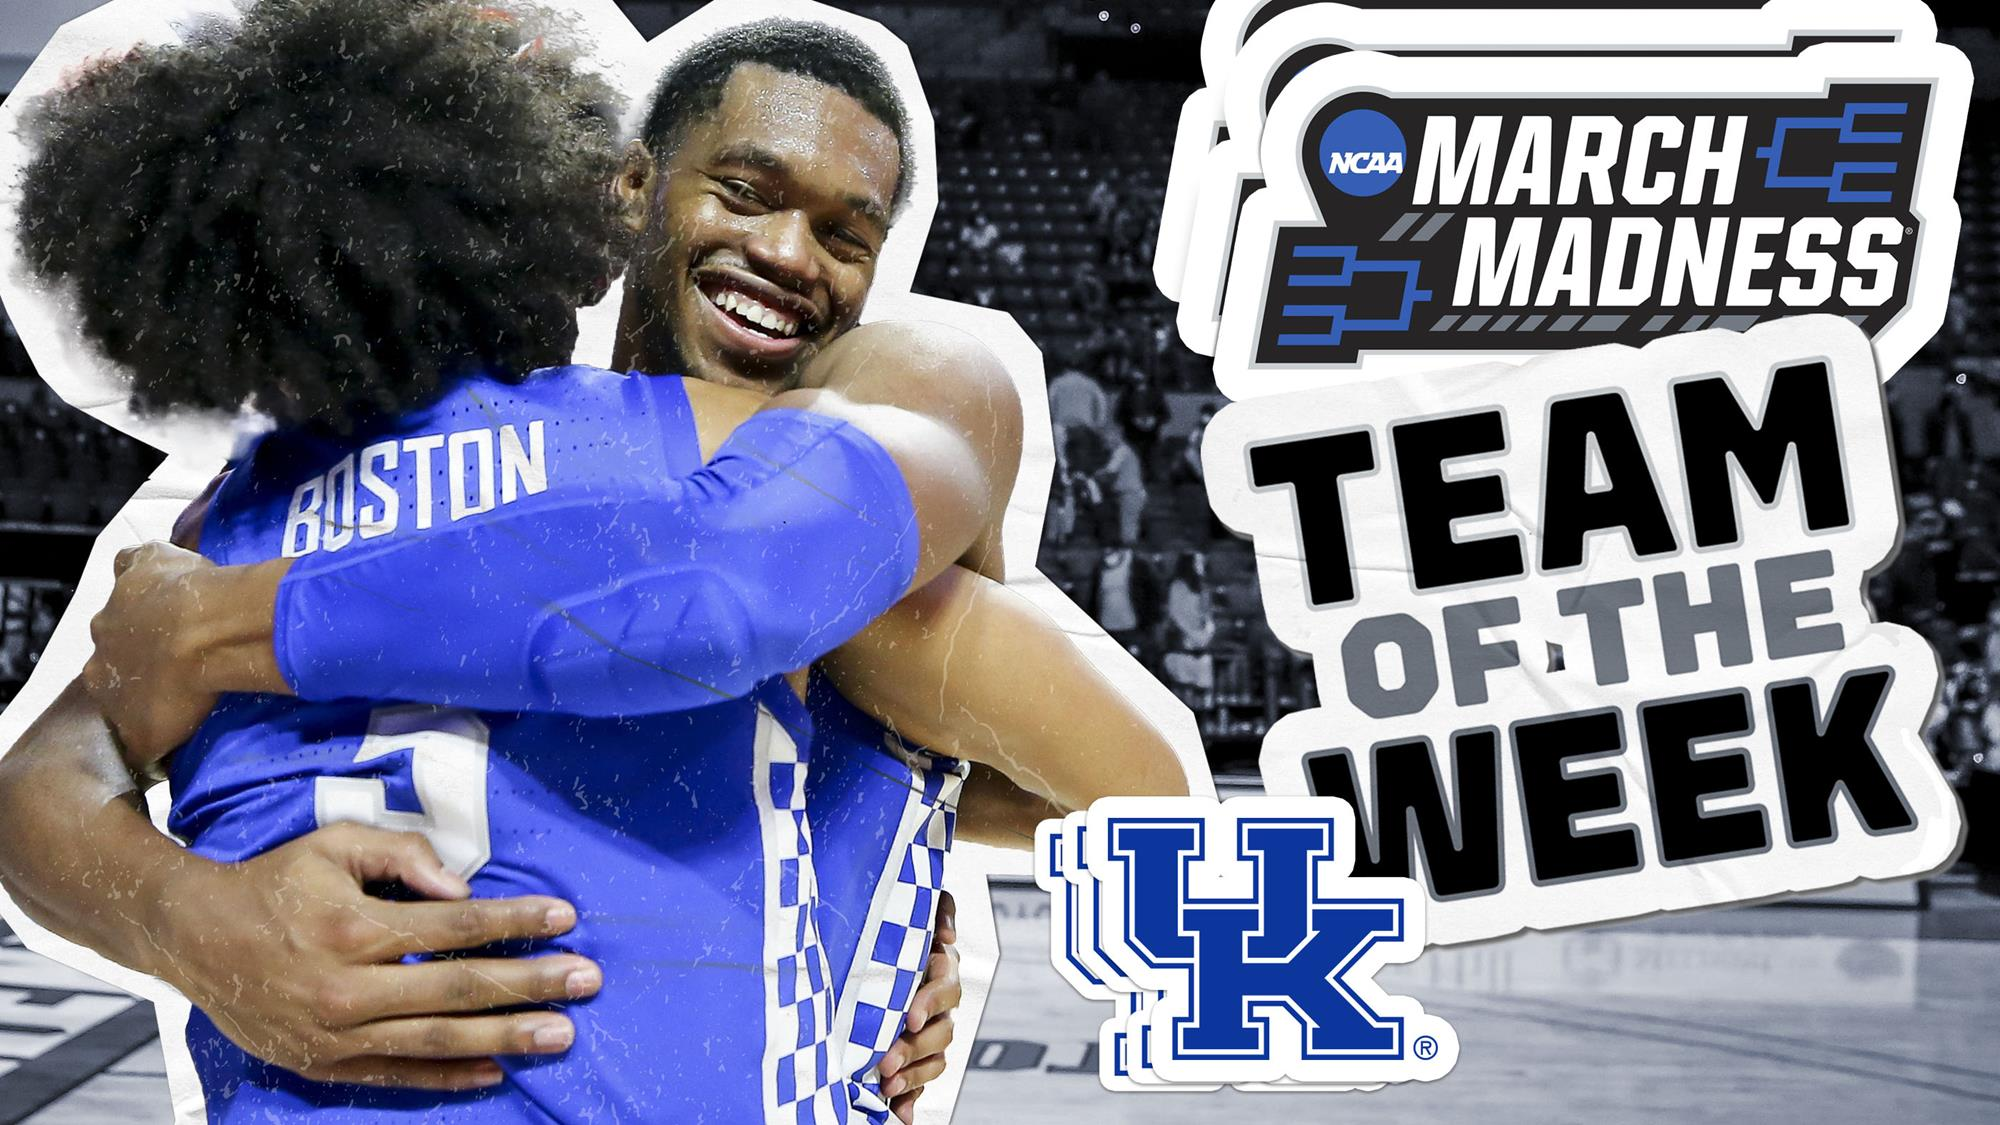 UK MBB Named NCAA March Madness Team of the Week